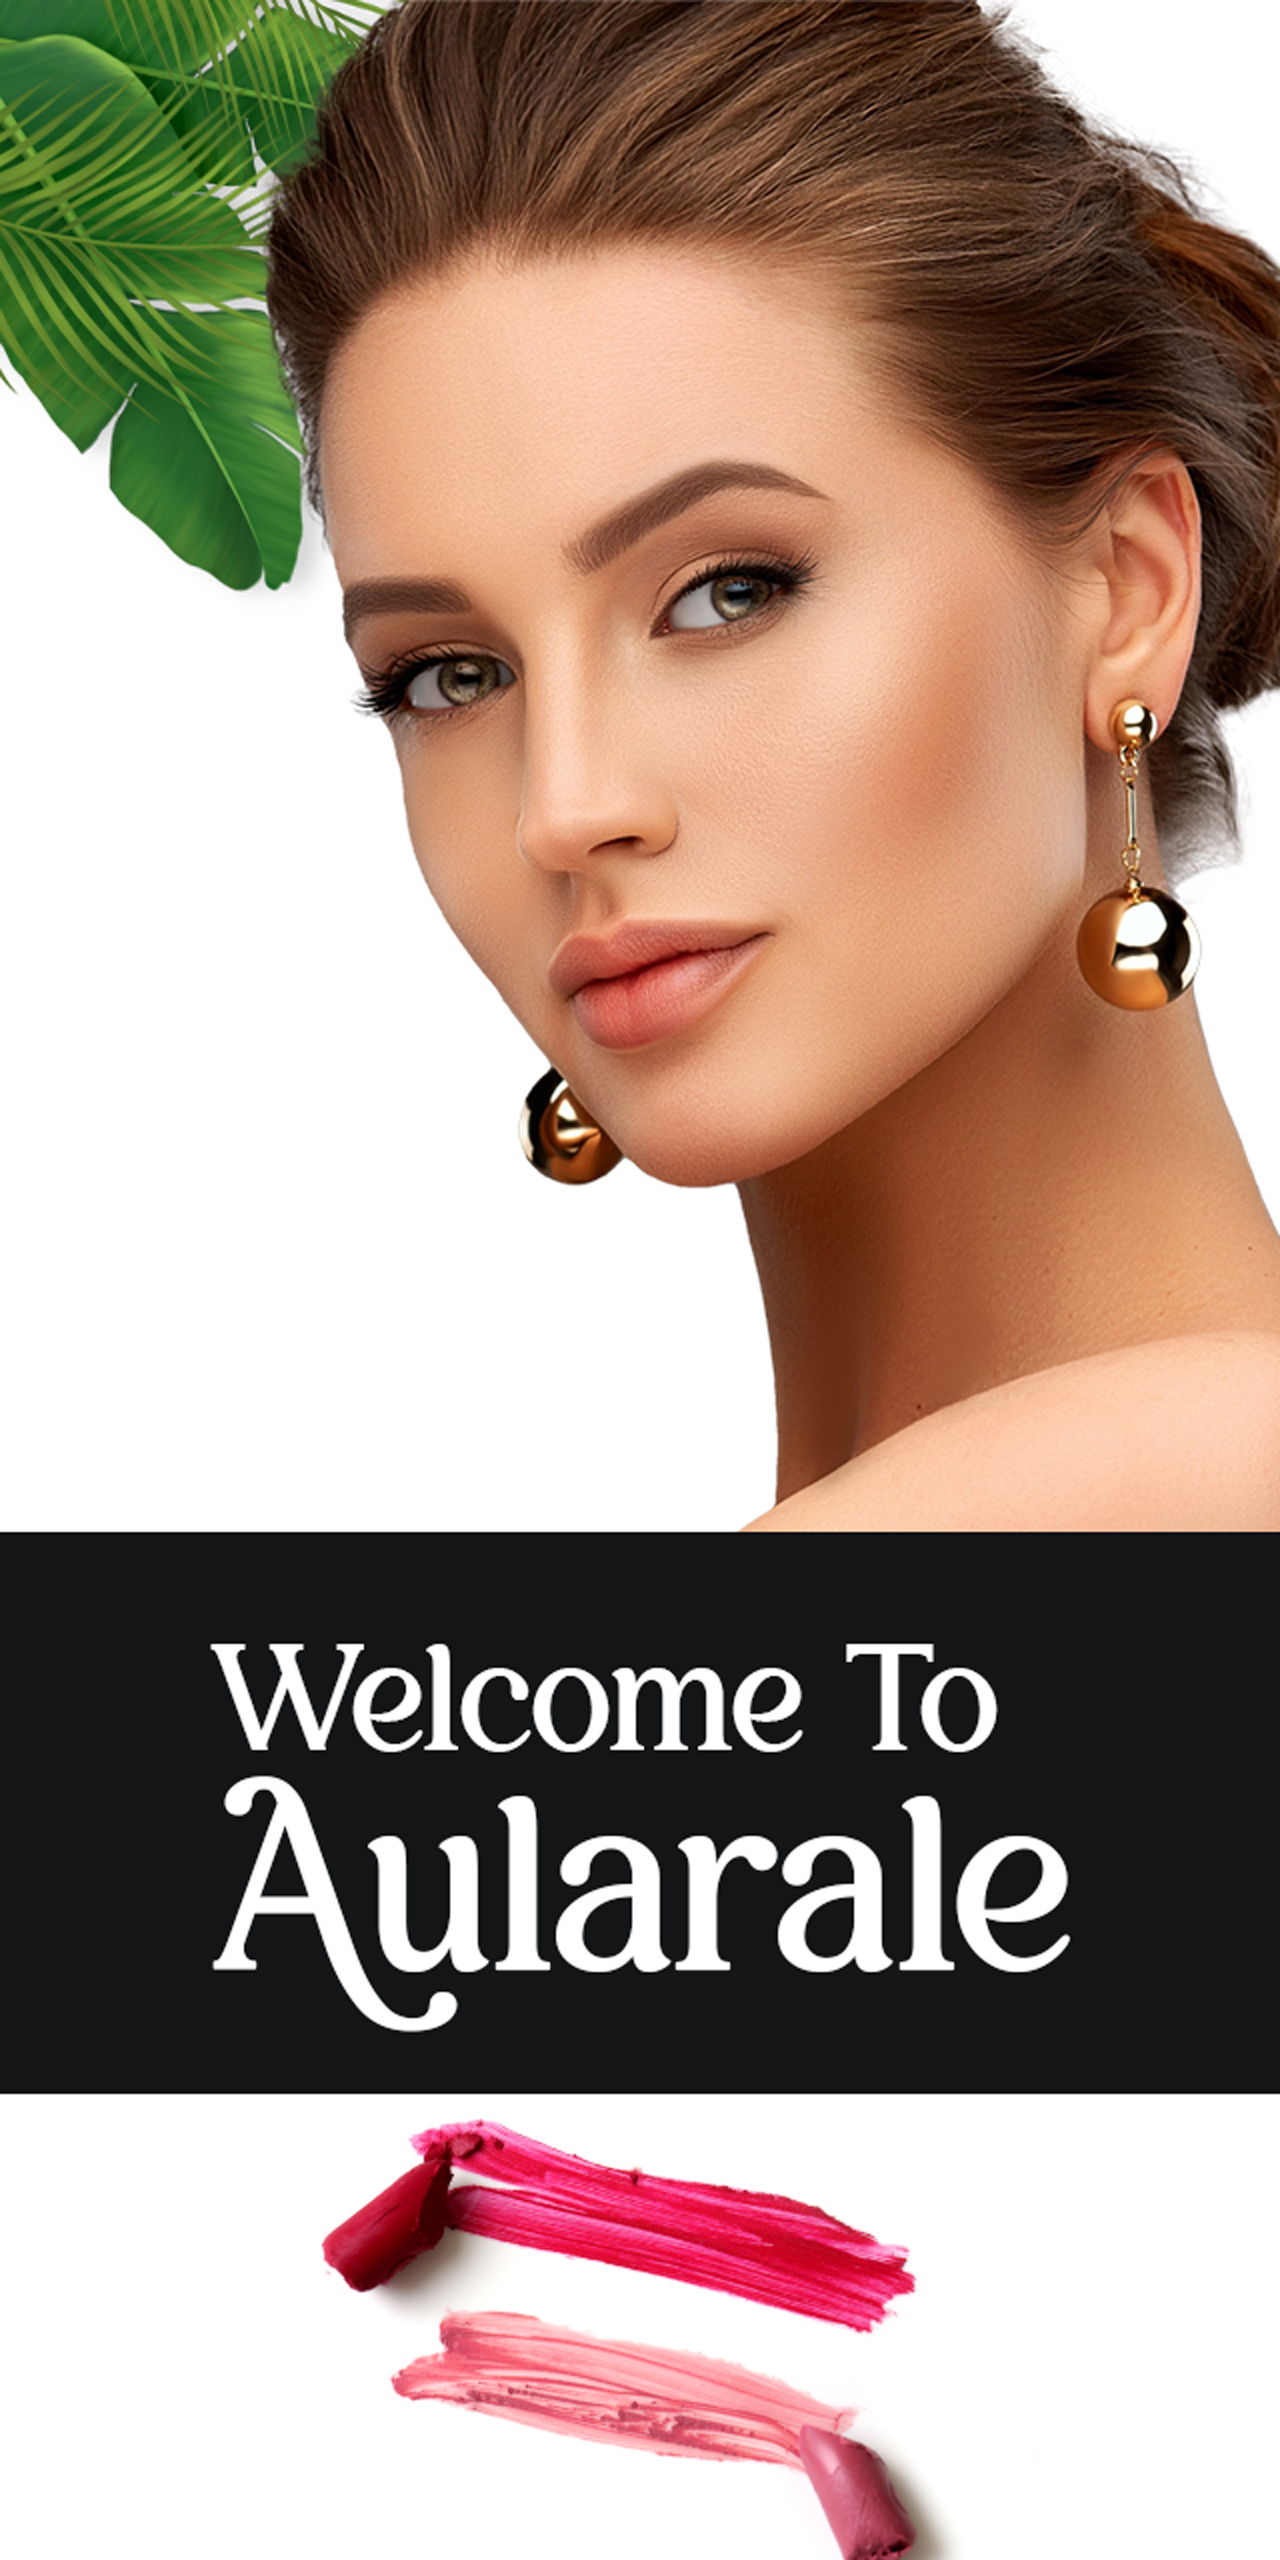 welcome-to-aularale-mobile-banner2